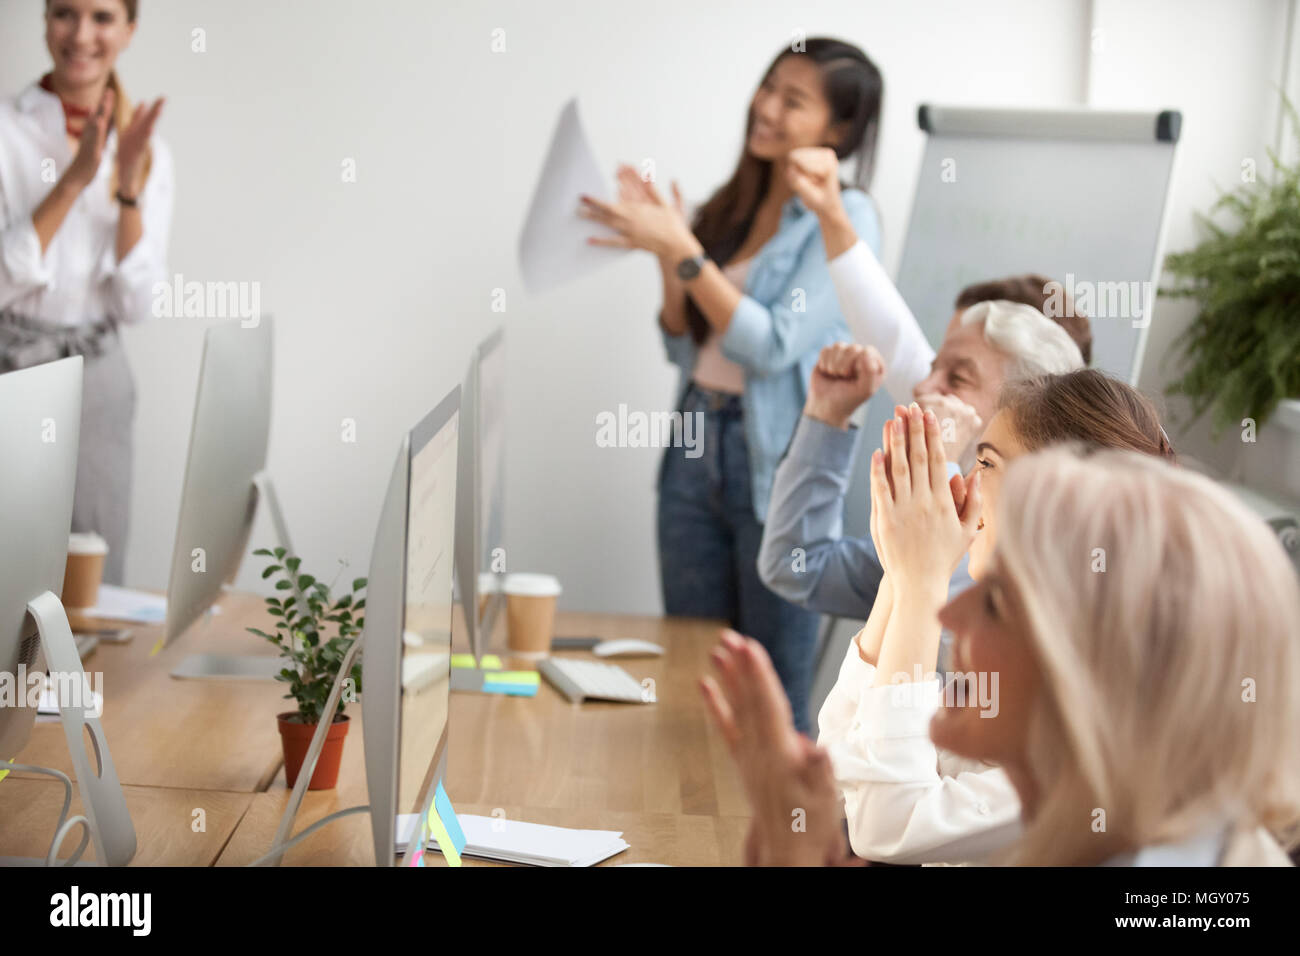 Corporate team people clapping hands celebrating success or cong Stock Photo